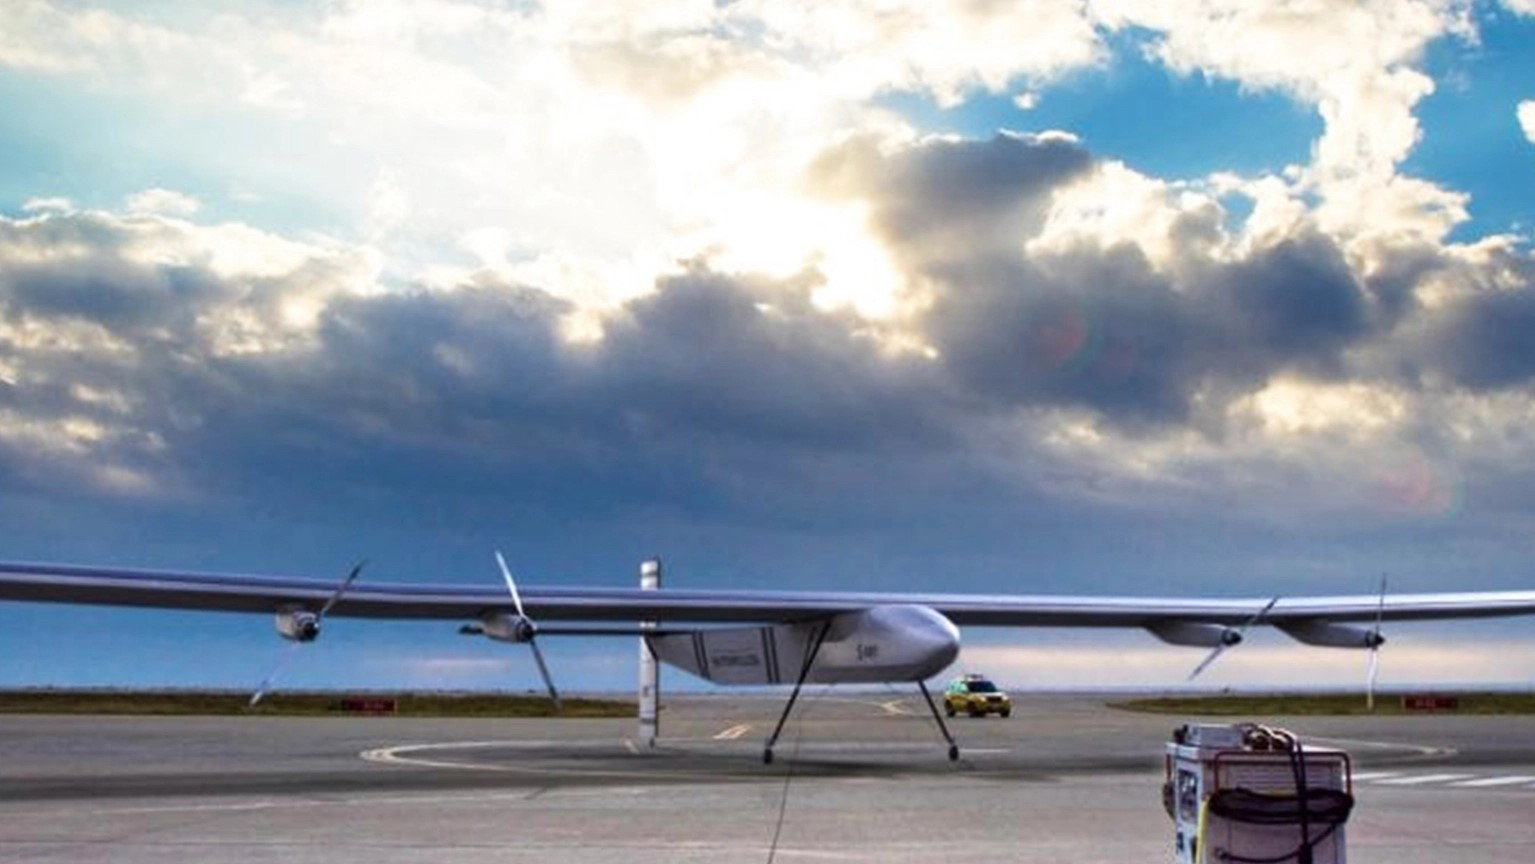 Front view of the U.S. Navy's Skydweller solar aircraft on the ground.